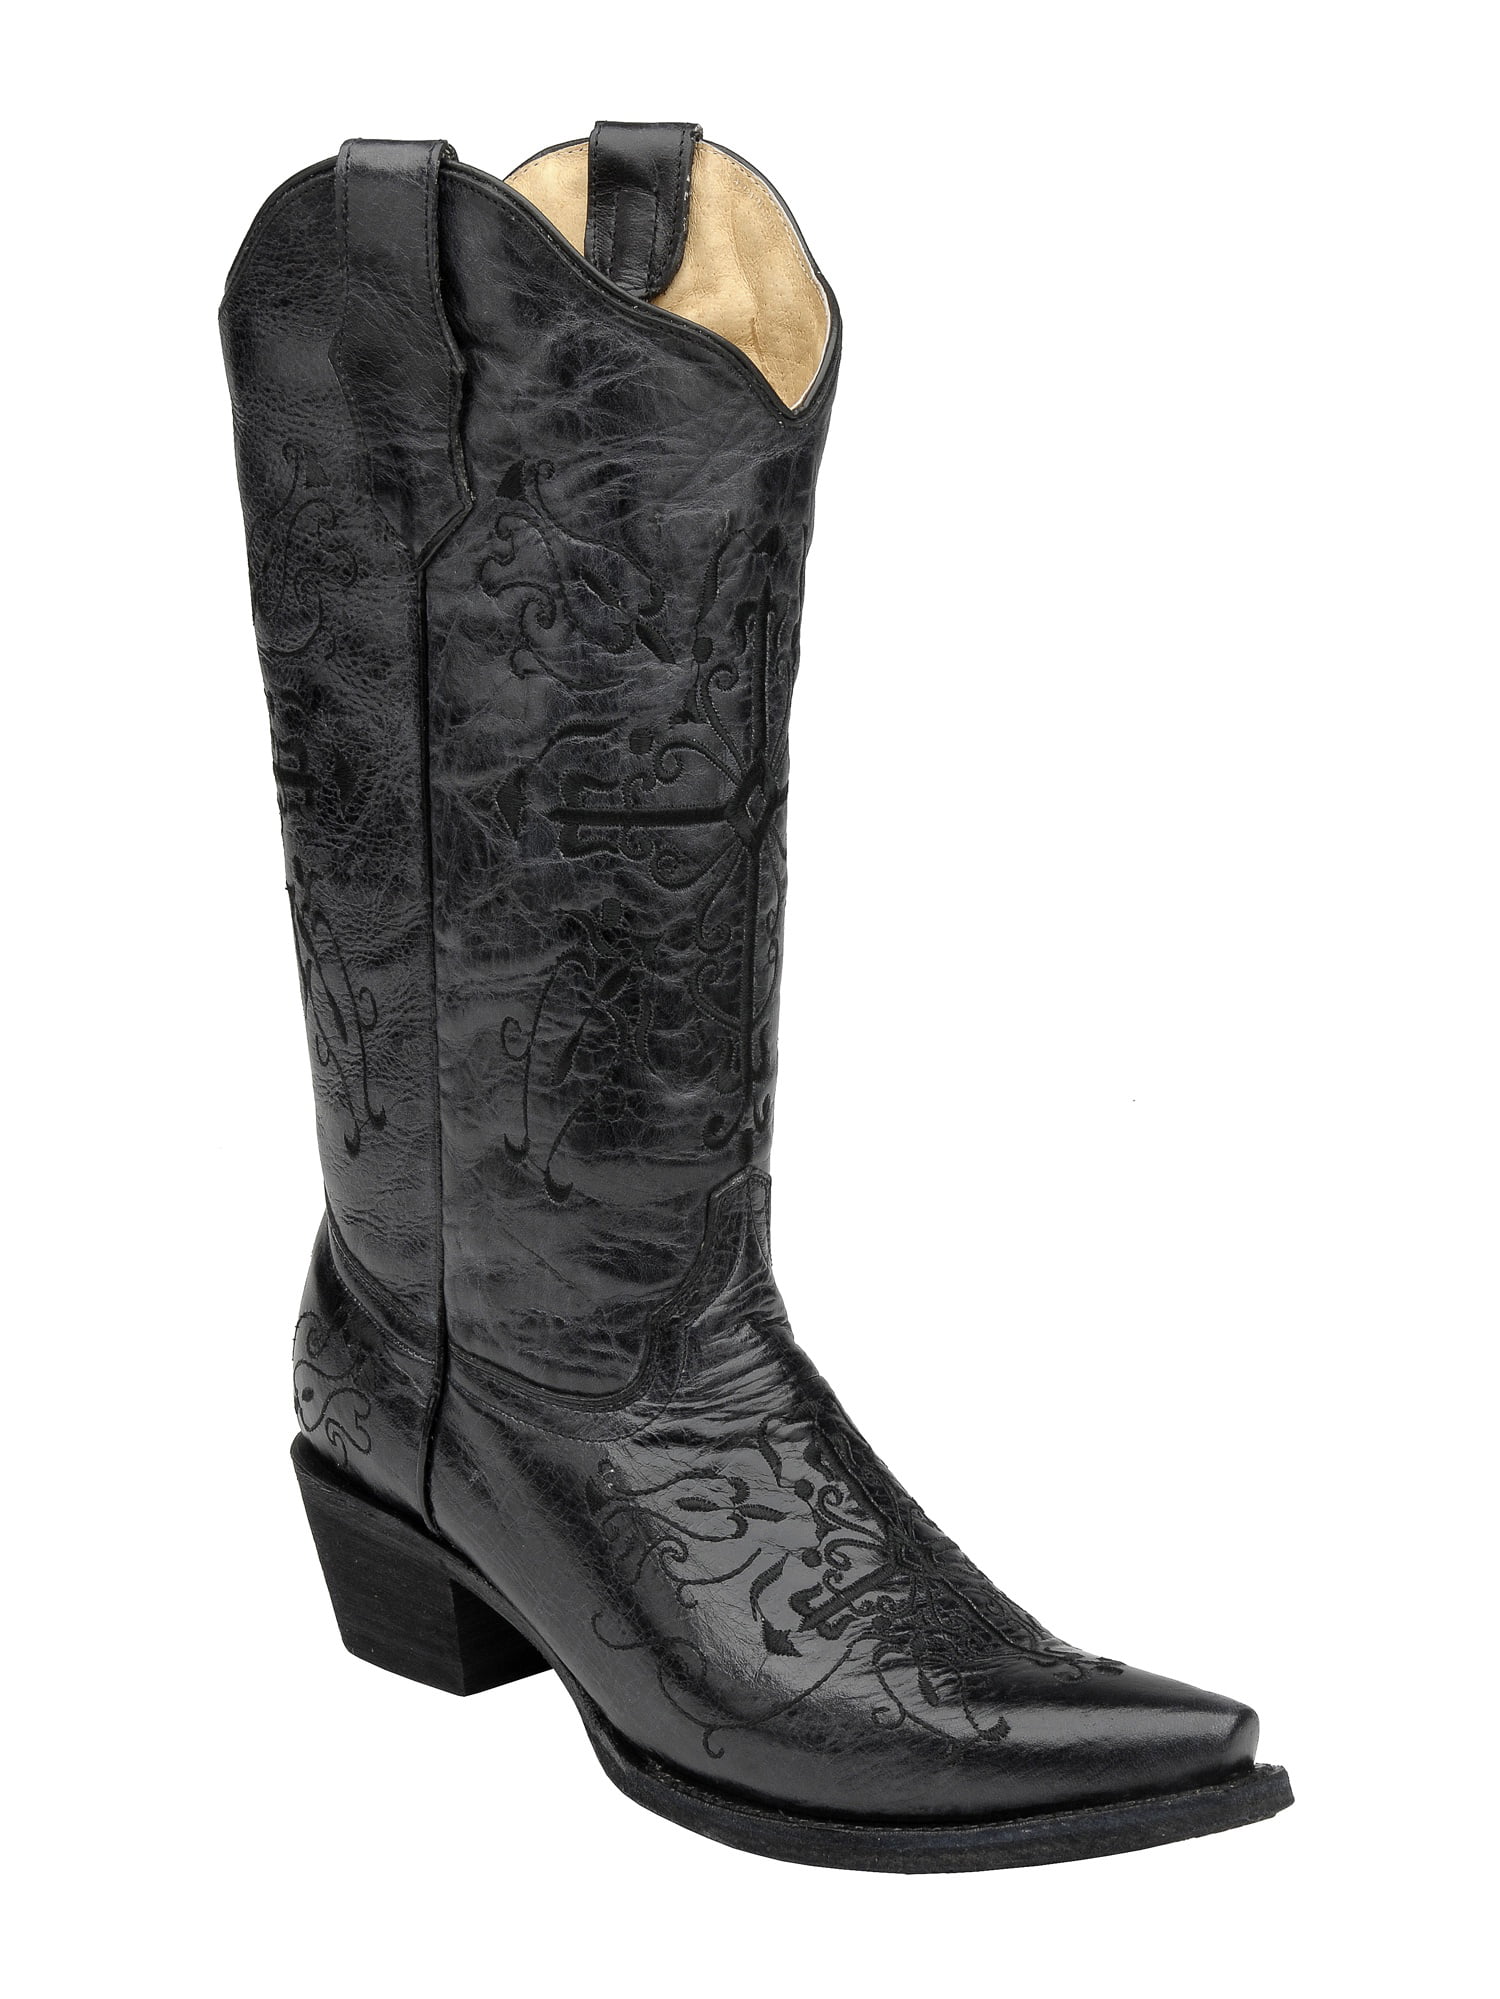 Corral Women's L5060 Cross Embroidery Black Snip Toe Western Boots 8 M